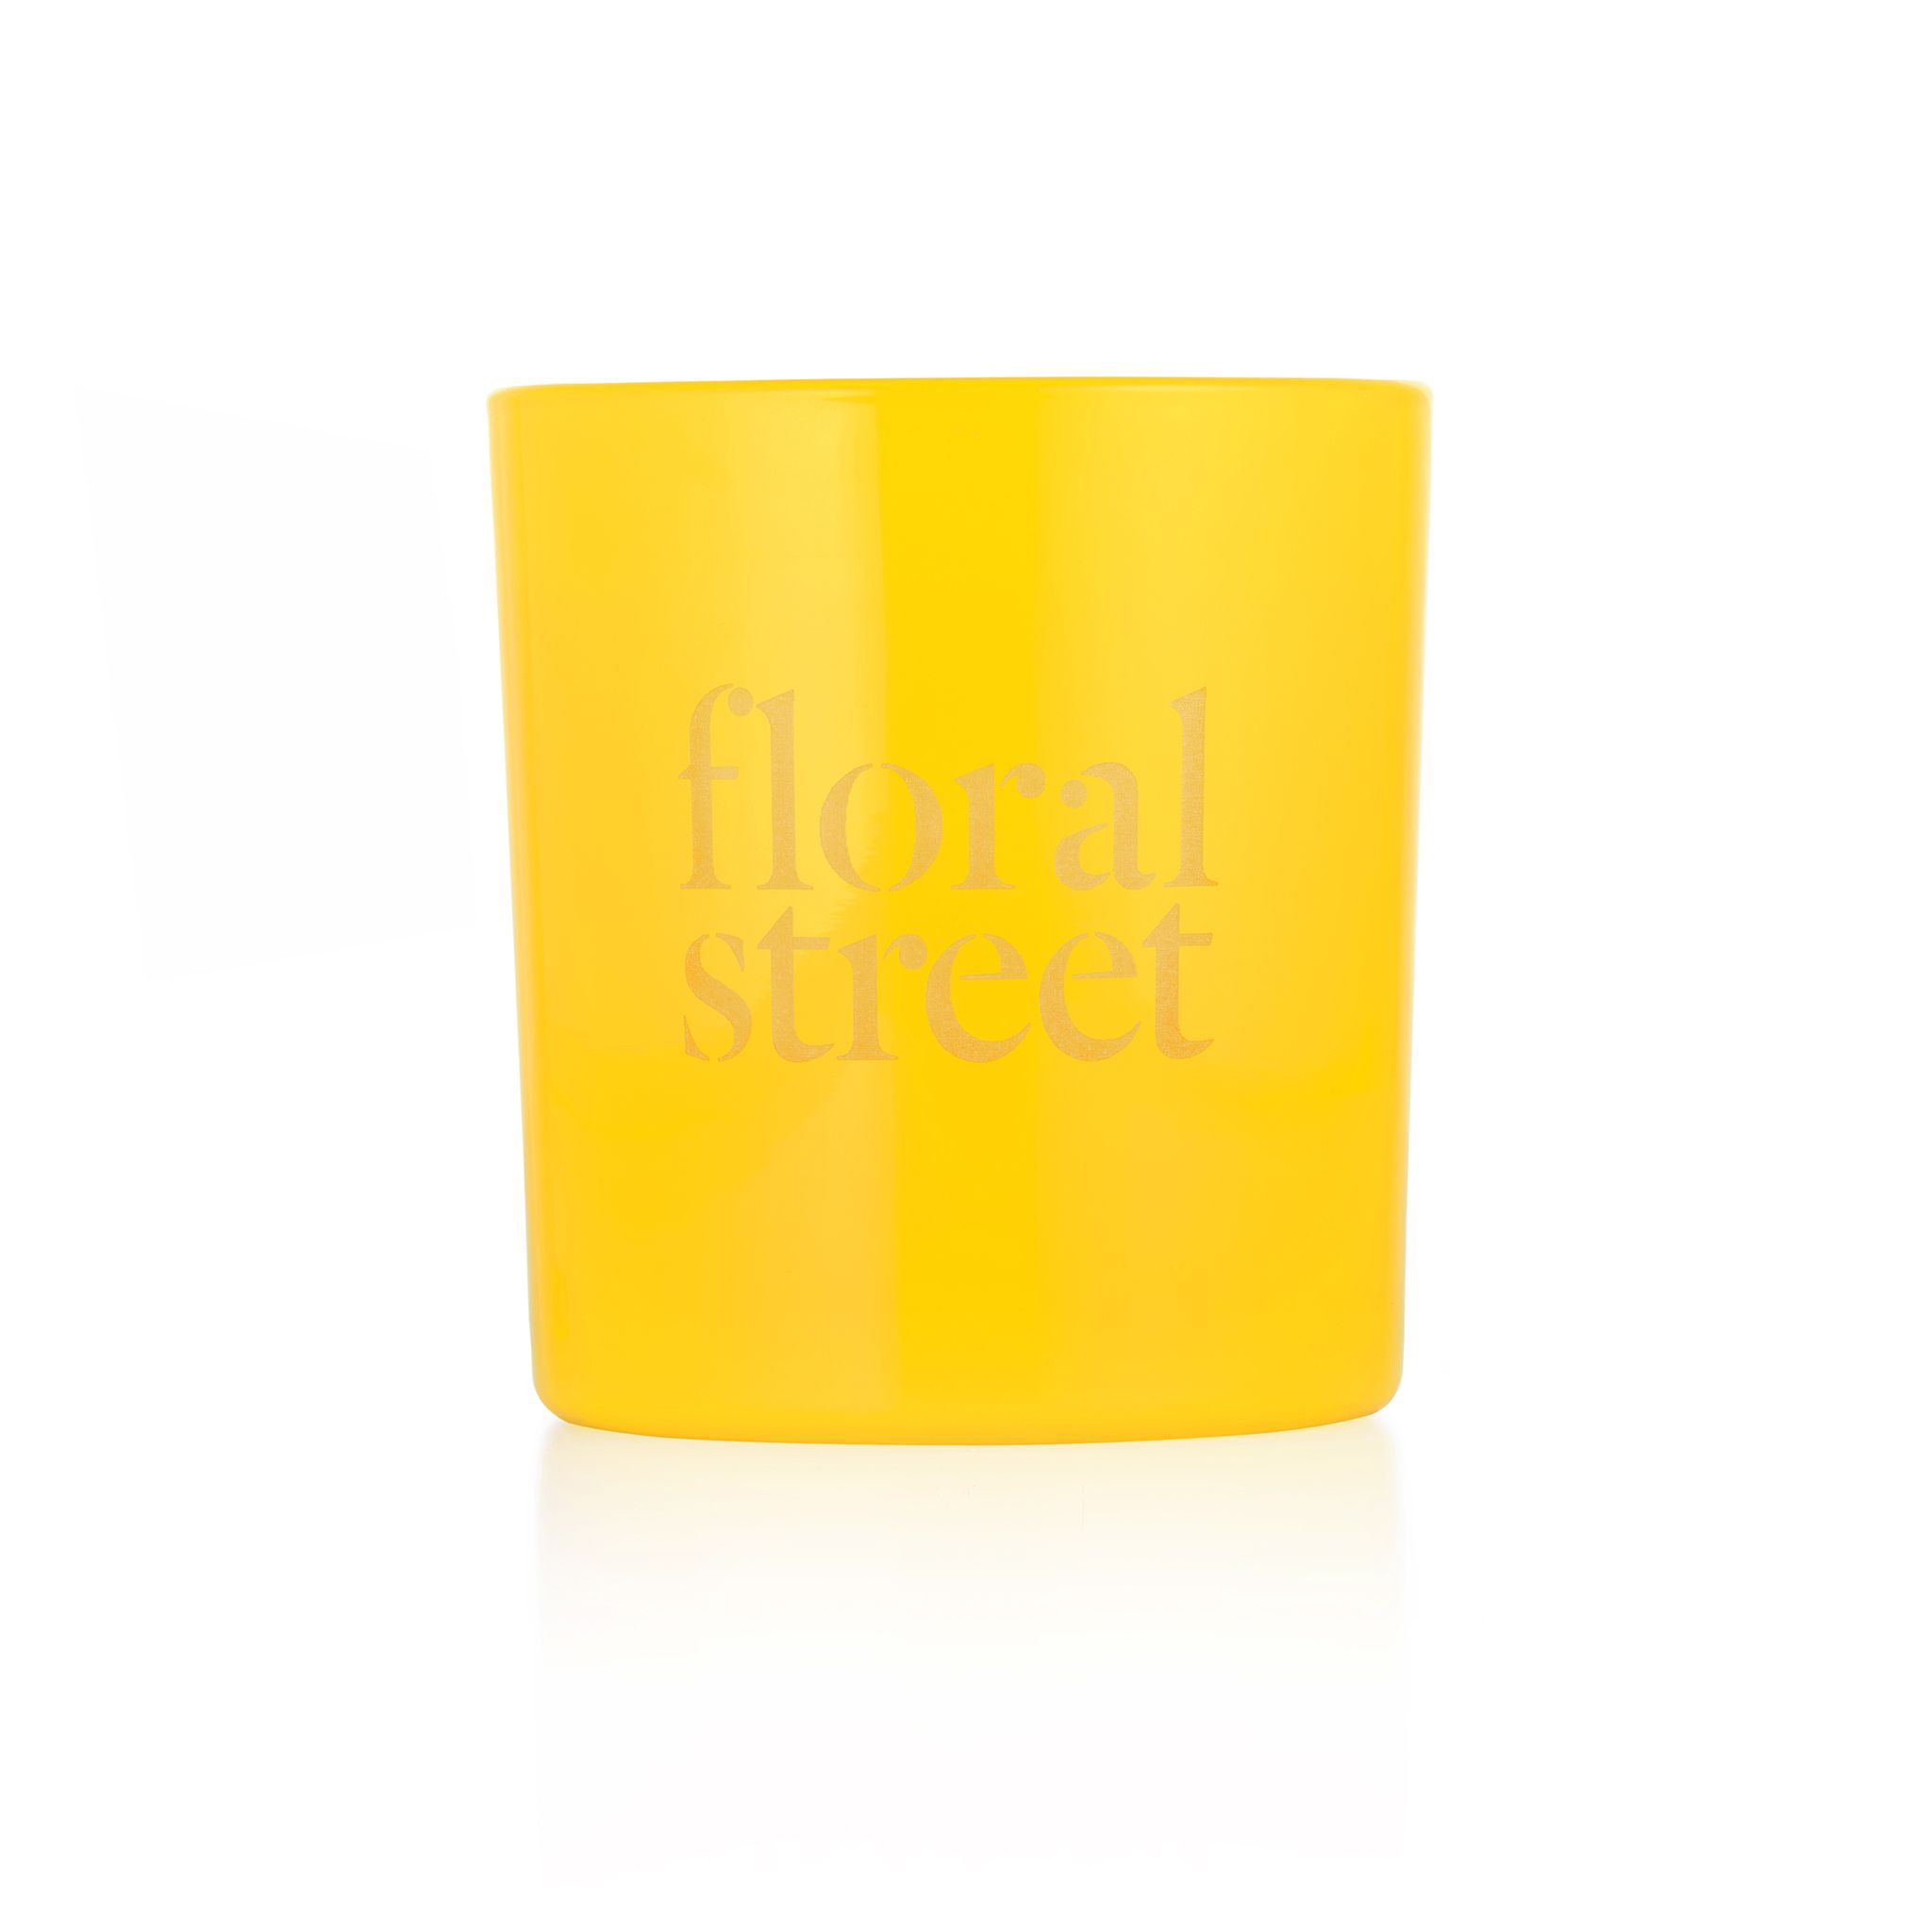 FLORAL STREET Vanilla Bloom Candle